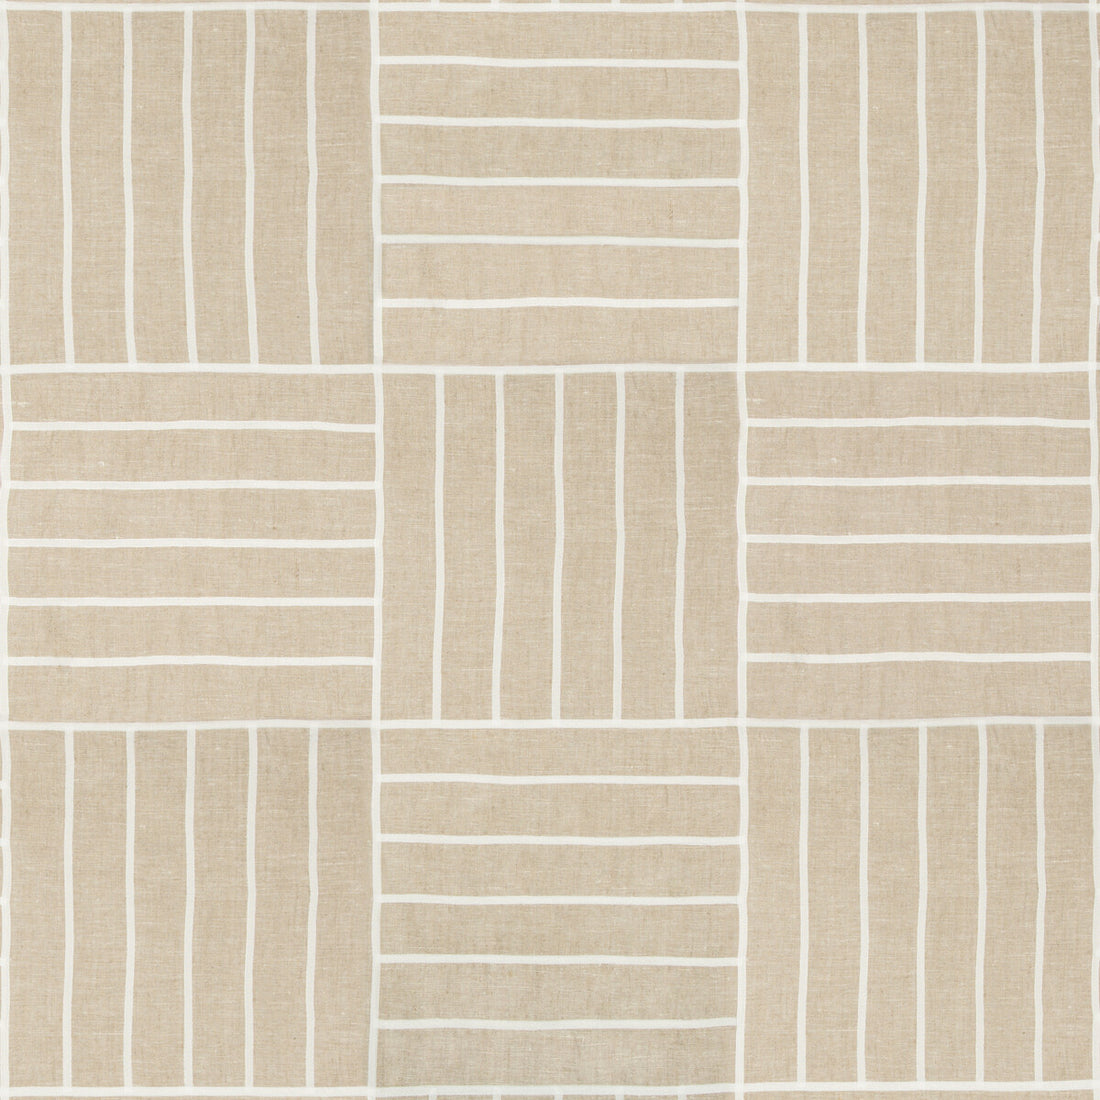 Local Grid fabric in natural color - pattern 35510.16.0 - by Kravet Design in the Barclay Butera Sagamore collection